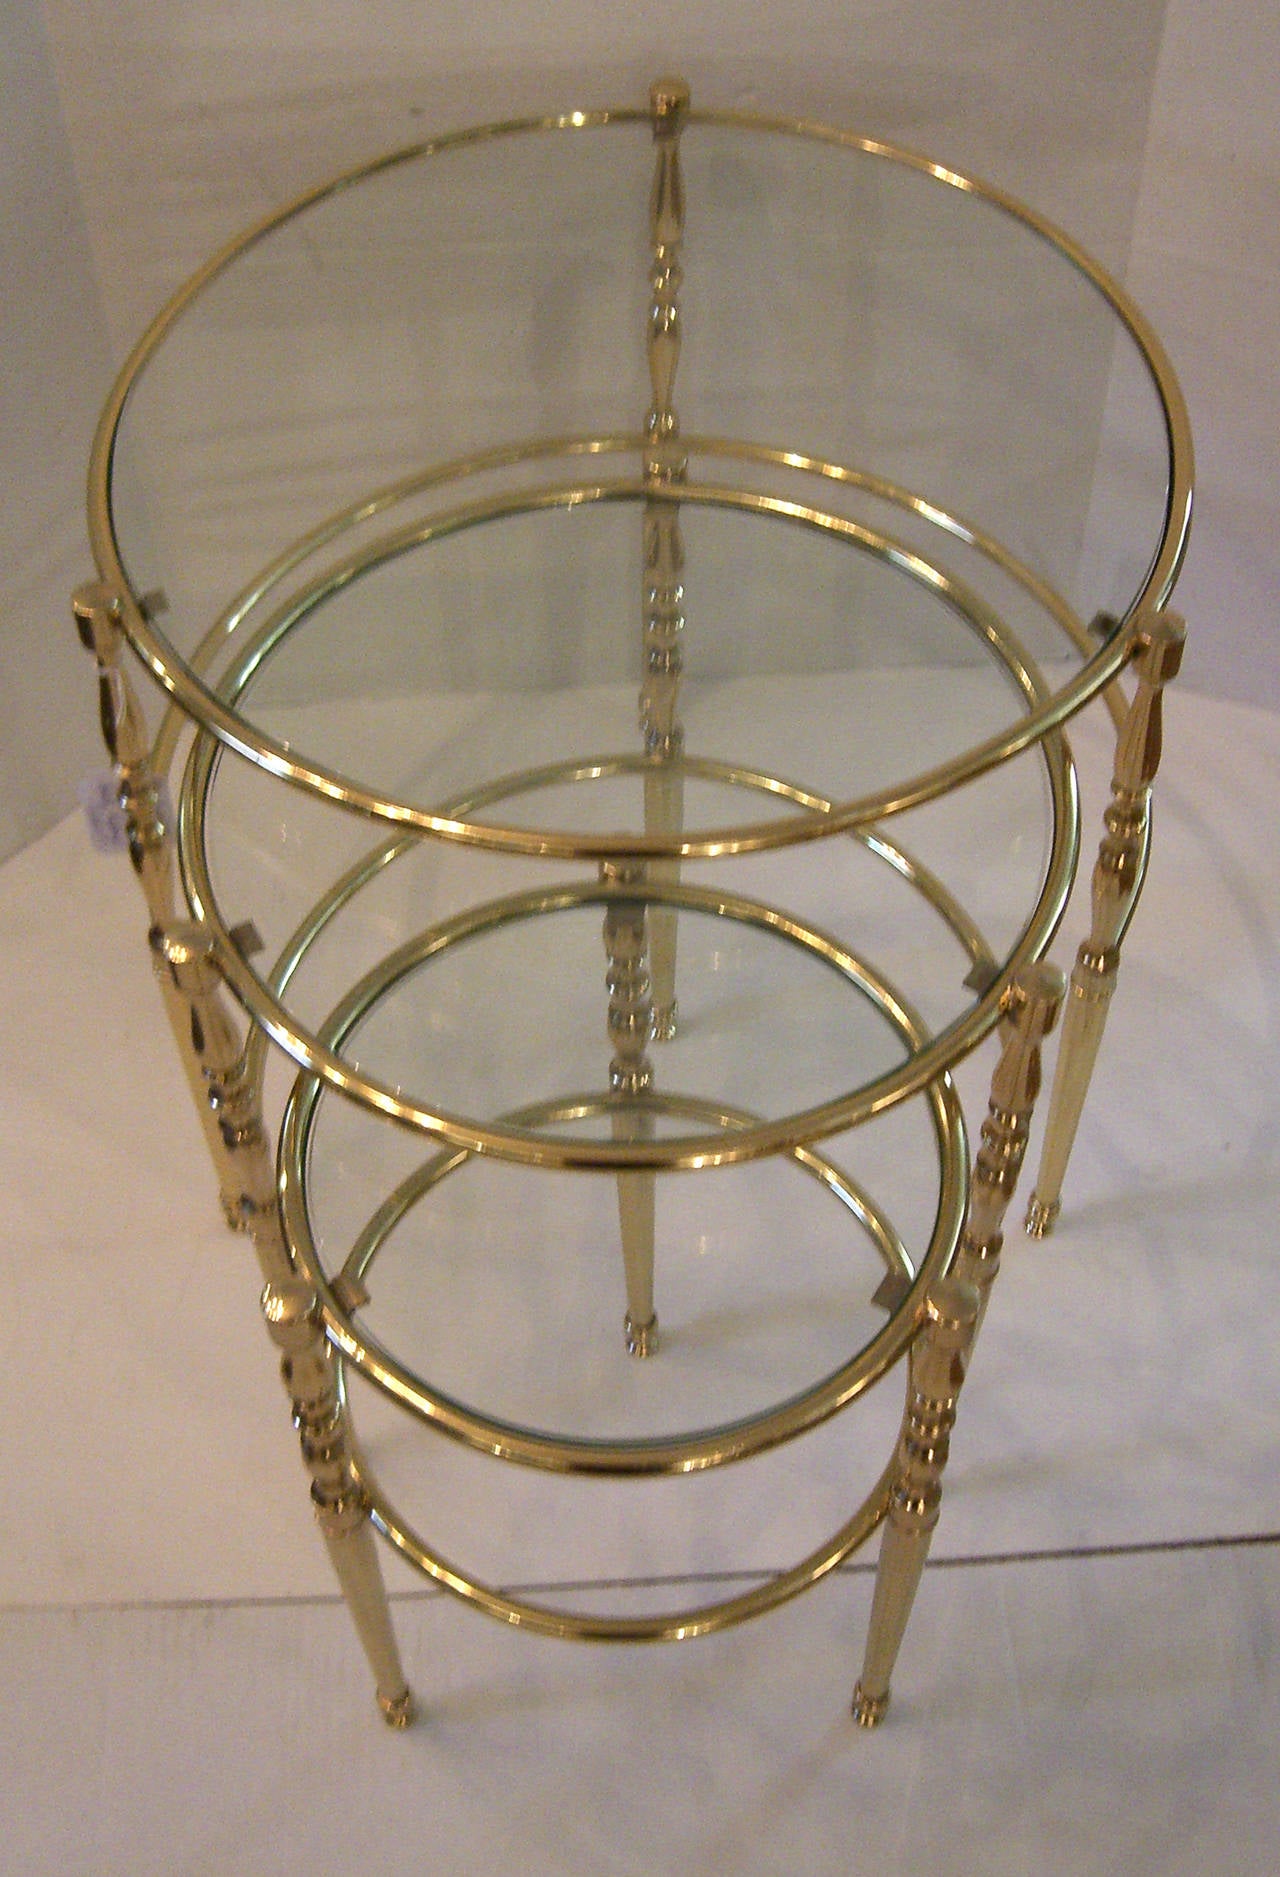 A set of 3 rare circular brass nesting tables with clear glass tops. The brass has been polished and lacquered.